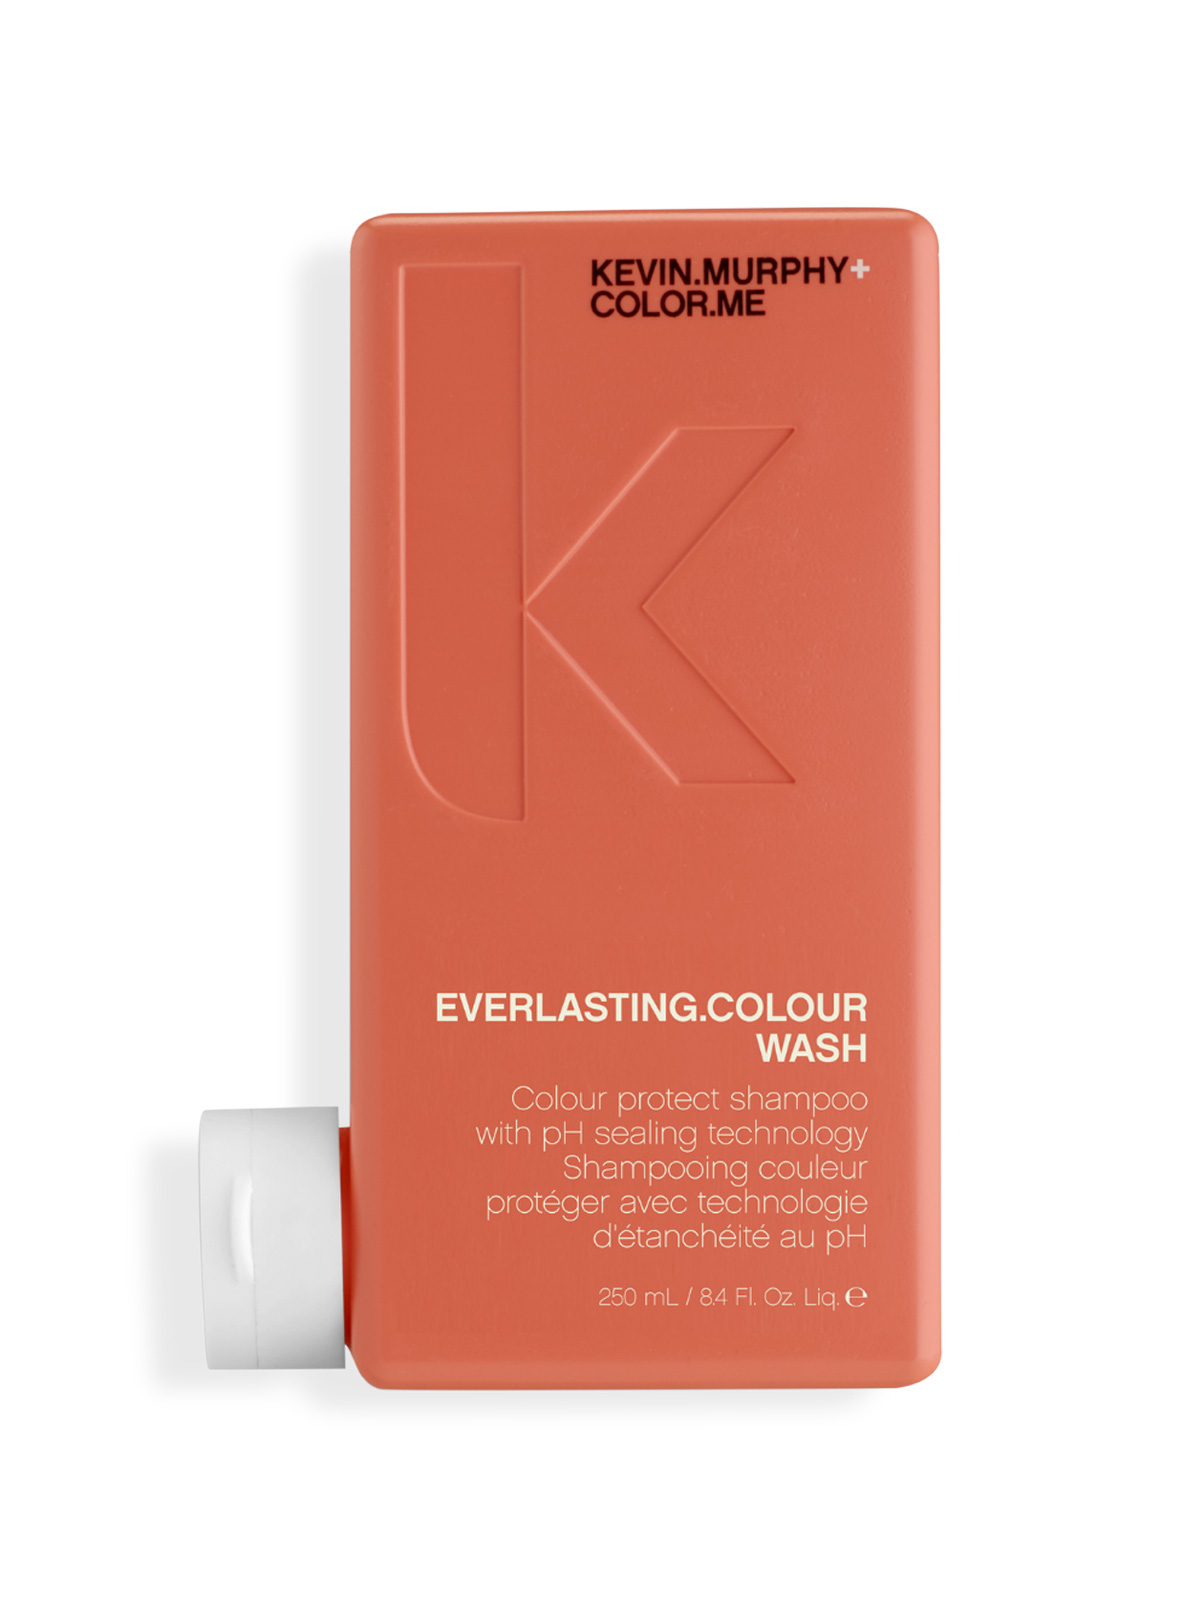 KEVIN.MURPHY EVERLASTING.COLOUR WASH